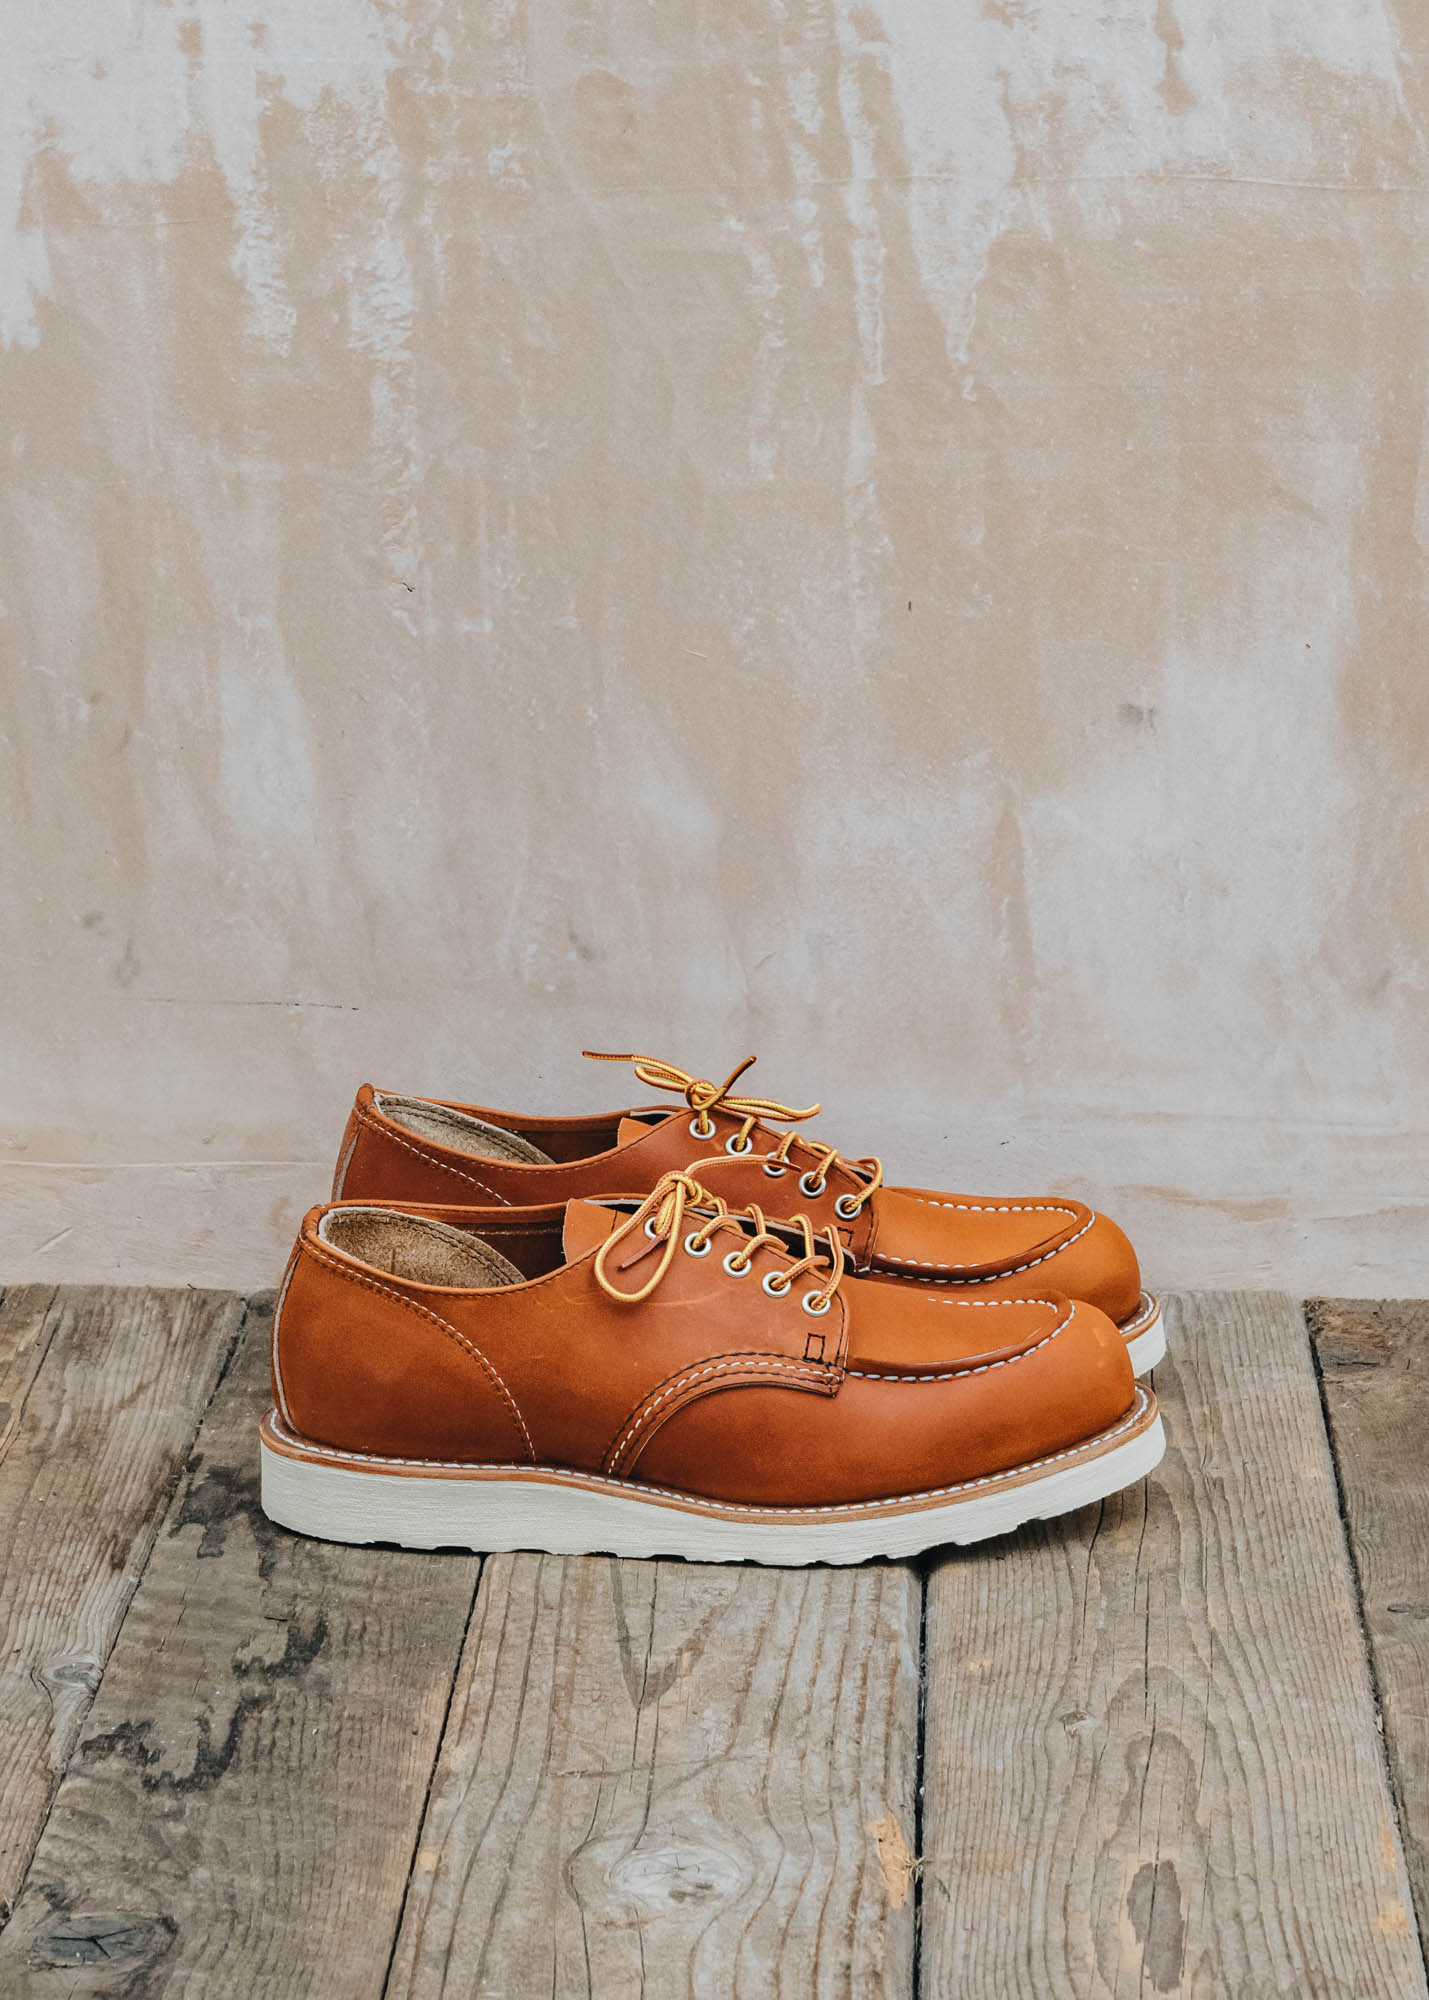 Red Wing 8092 Shop Moc Oxford Shoes in Oro Legacy